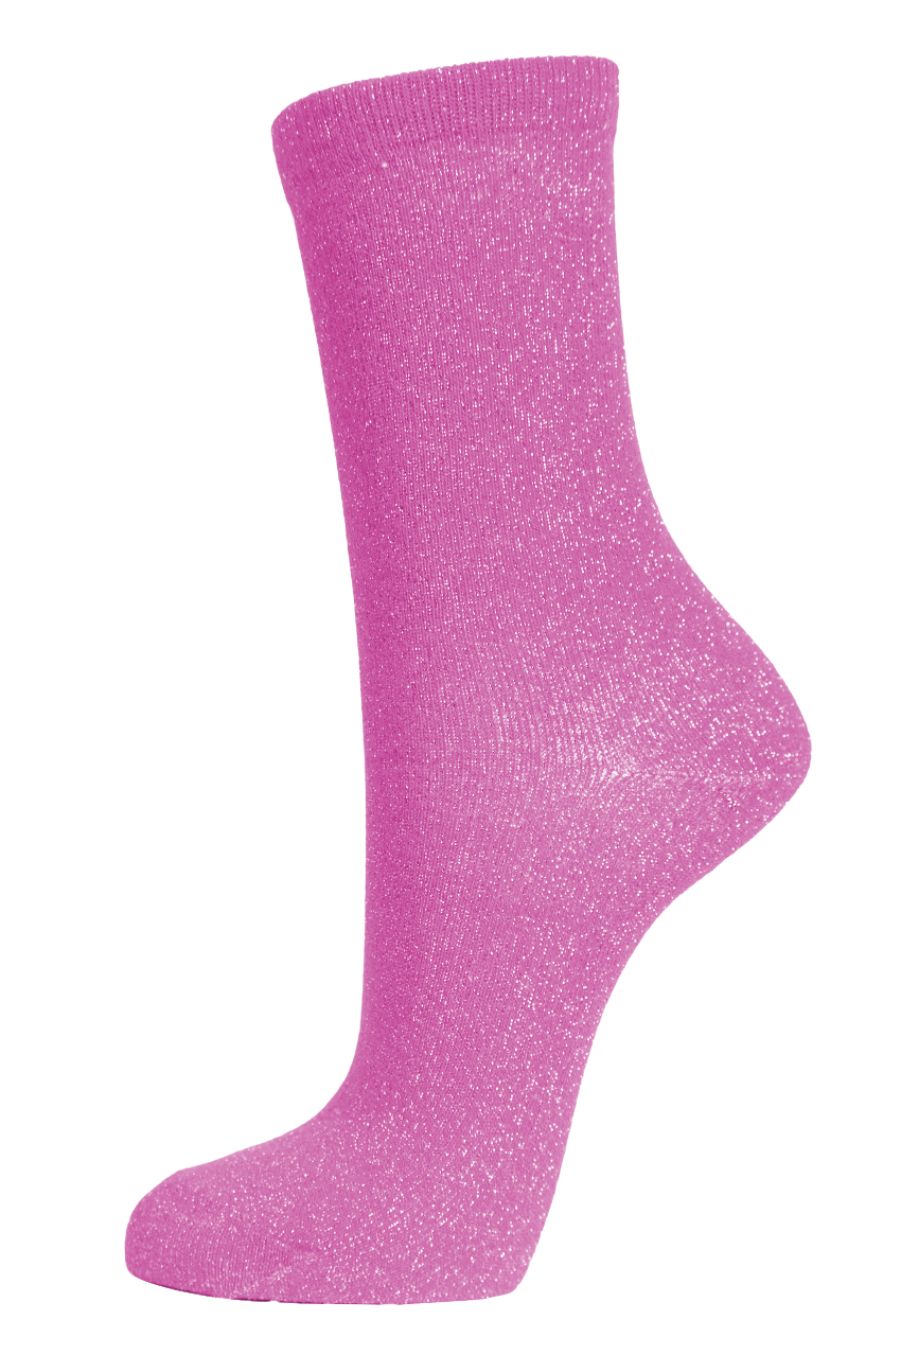 hot pink ankle socks with an all over silver glitter sparkle